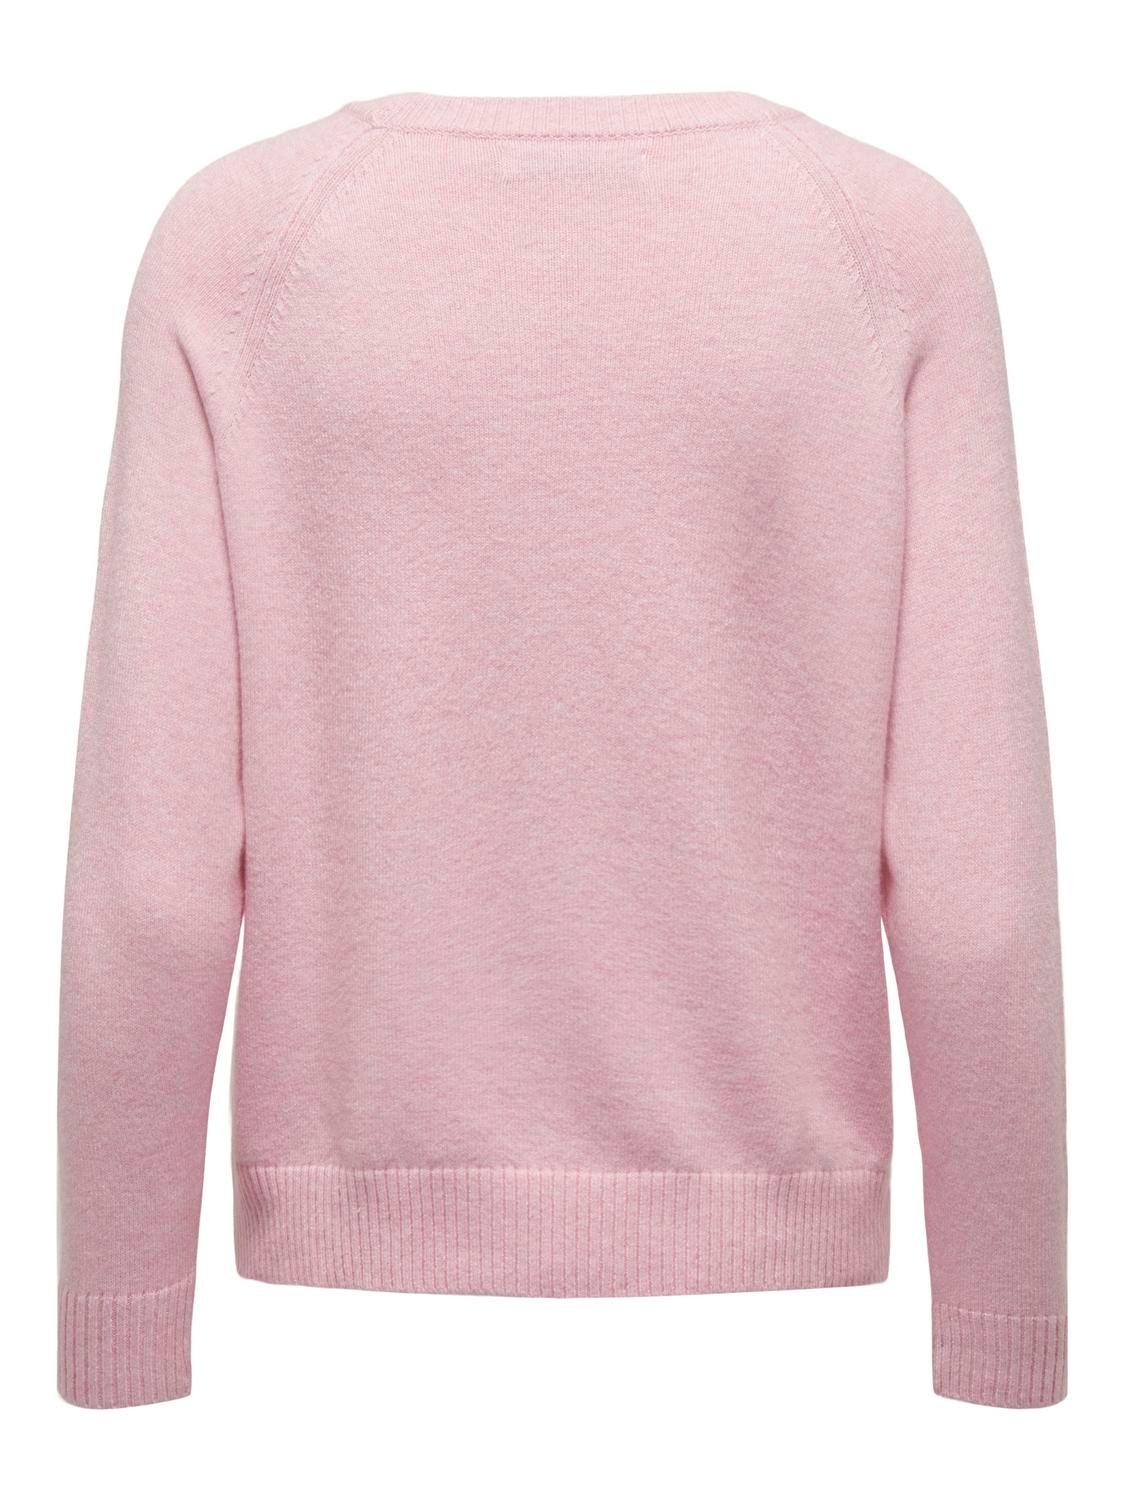 ONLY Couleur unie Pull en maille -Light Pink - 15170427